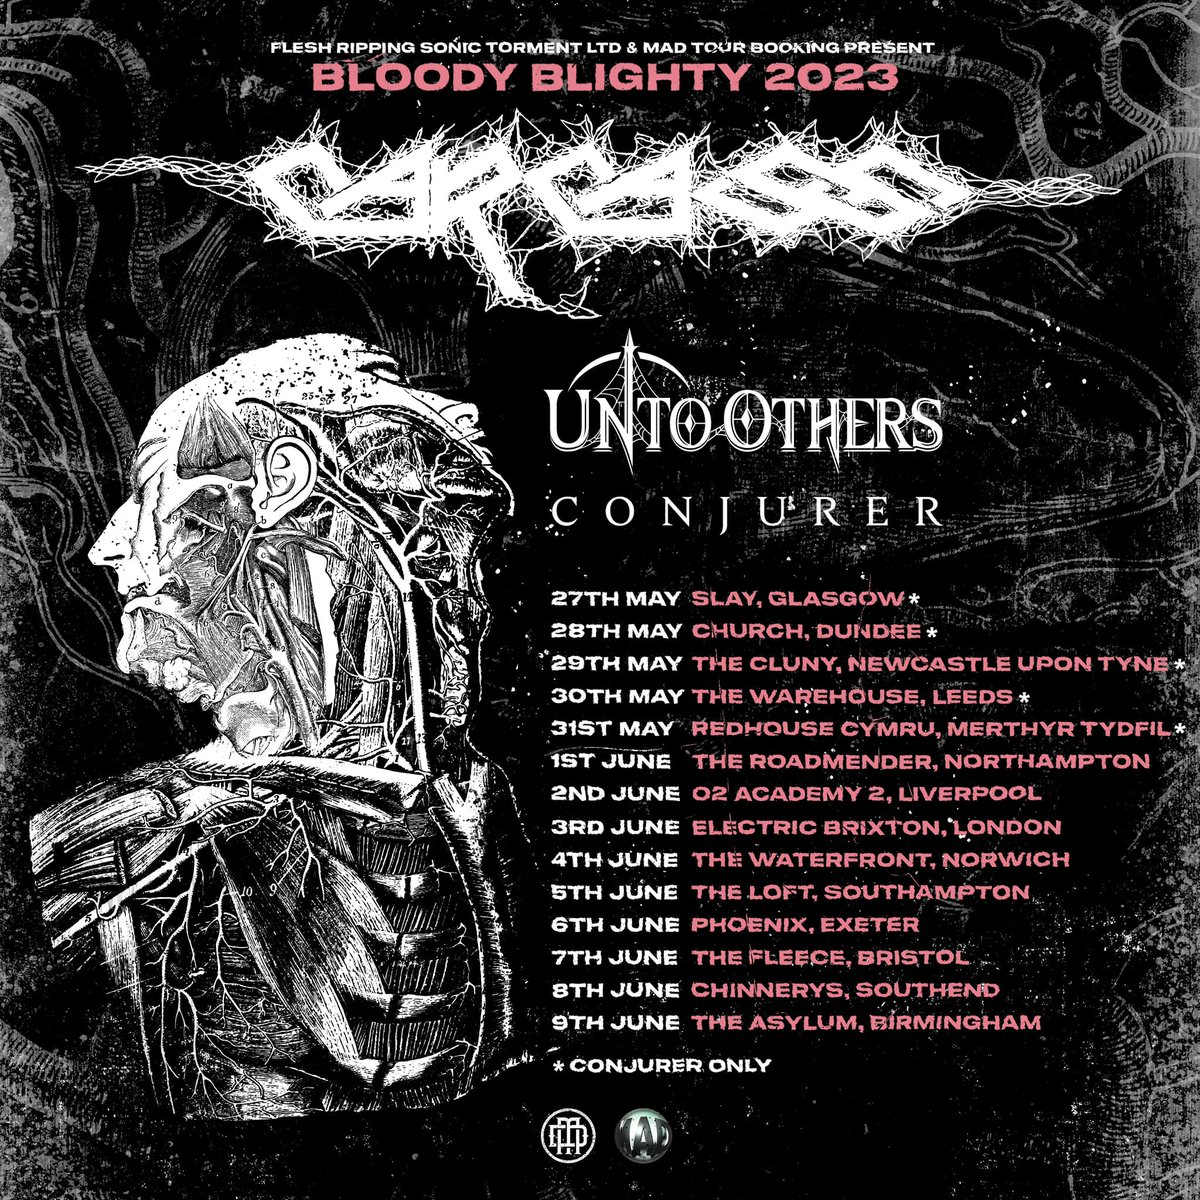 Bloody Blighty 2023 Tour 14 intimate club shows all across the U.K. with Unto Others (1st June - 9th June) and Conjurer (all dates) This is the first full U.K. tour since the 90’s! Tickets at: mad-tourbooking.de/carcass/ #Carcass #DeathMetal #Metal